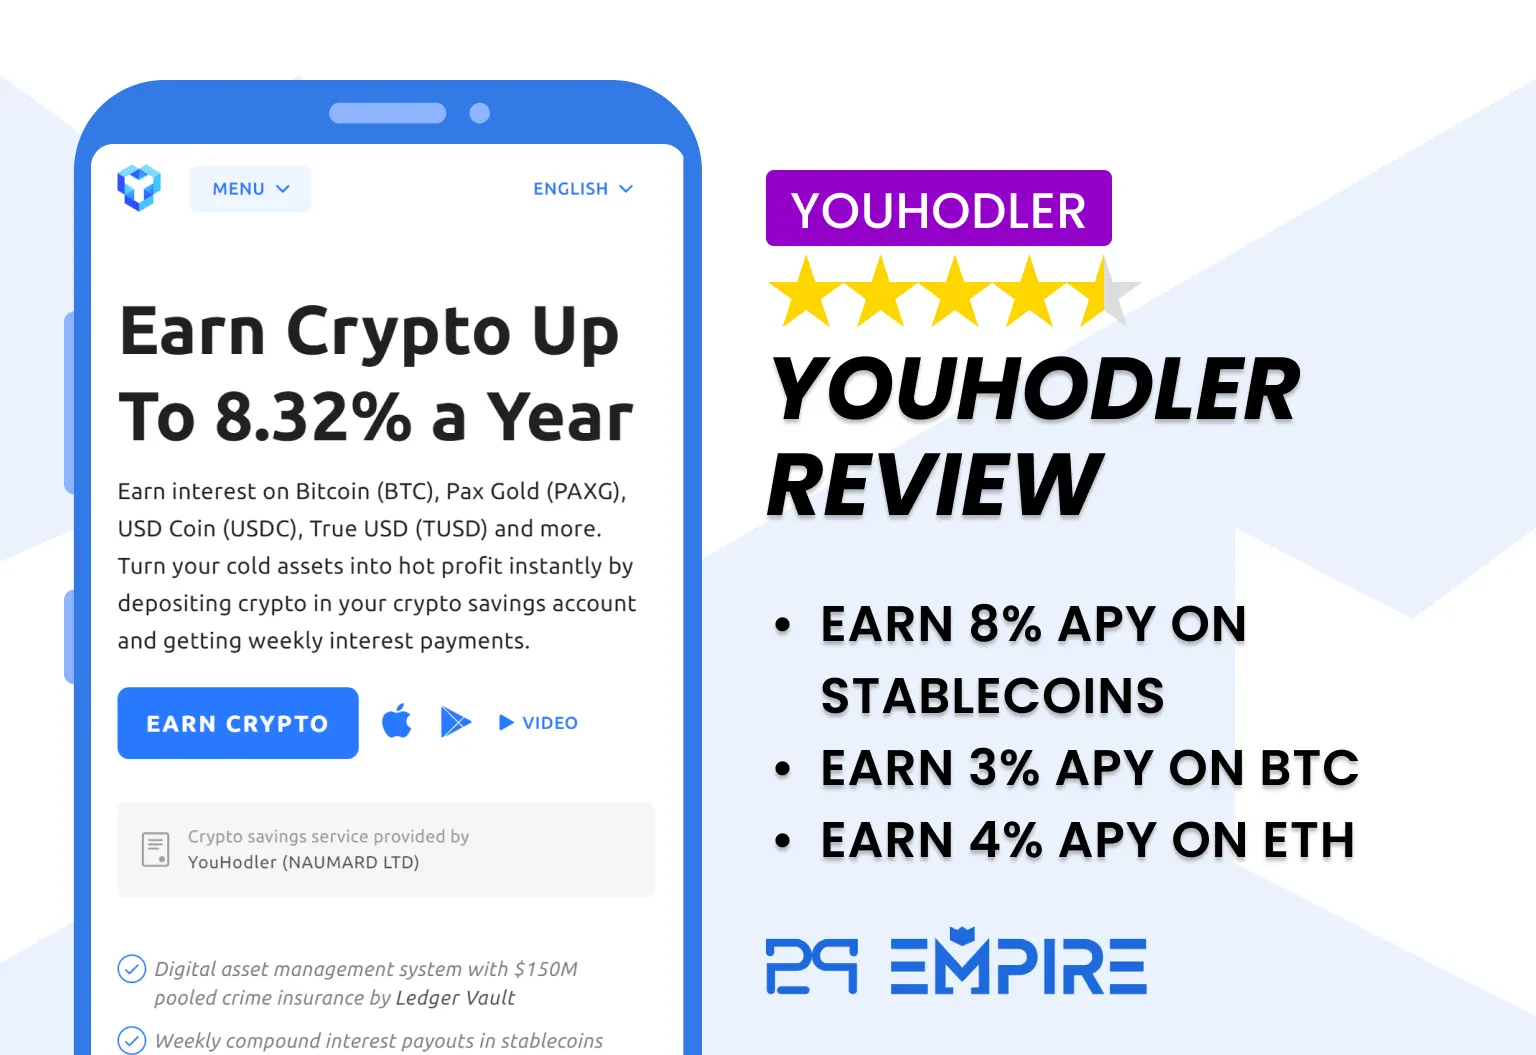 youhodler review